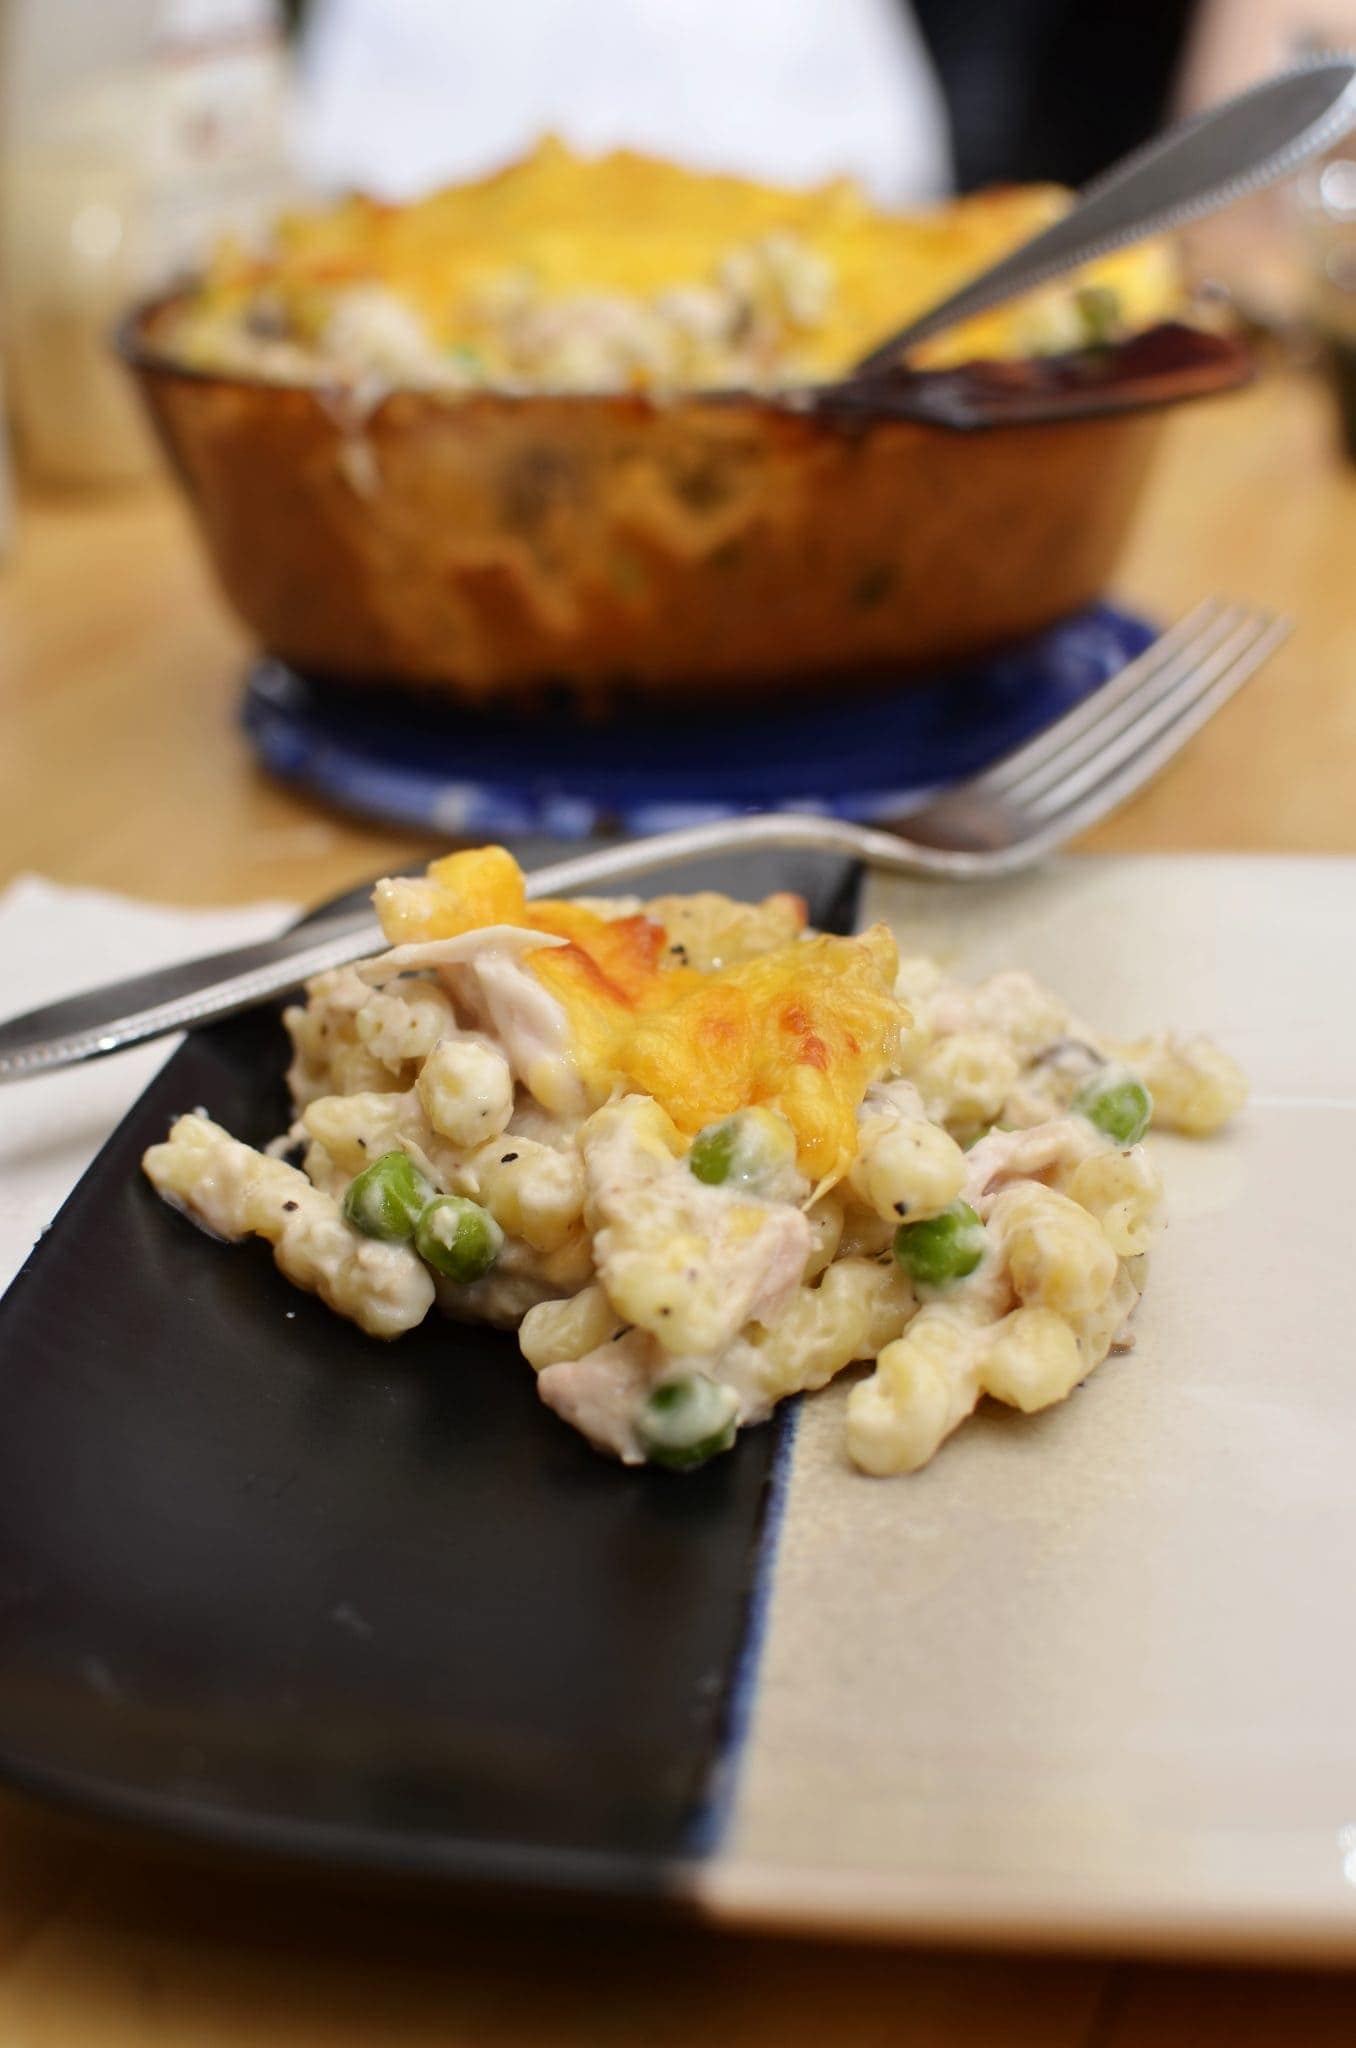 A plate of tuna casserole cooked with melted cheese on top.